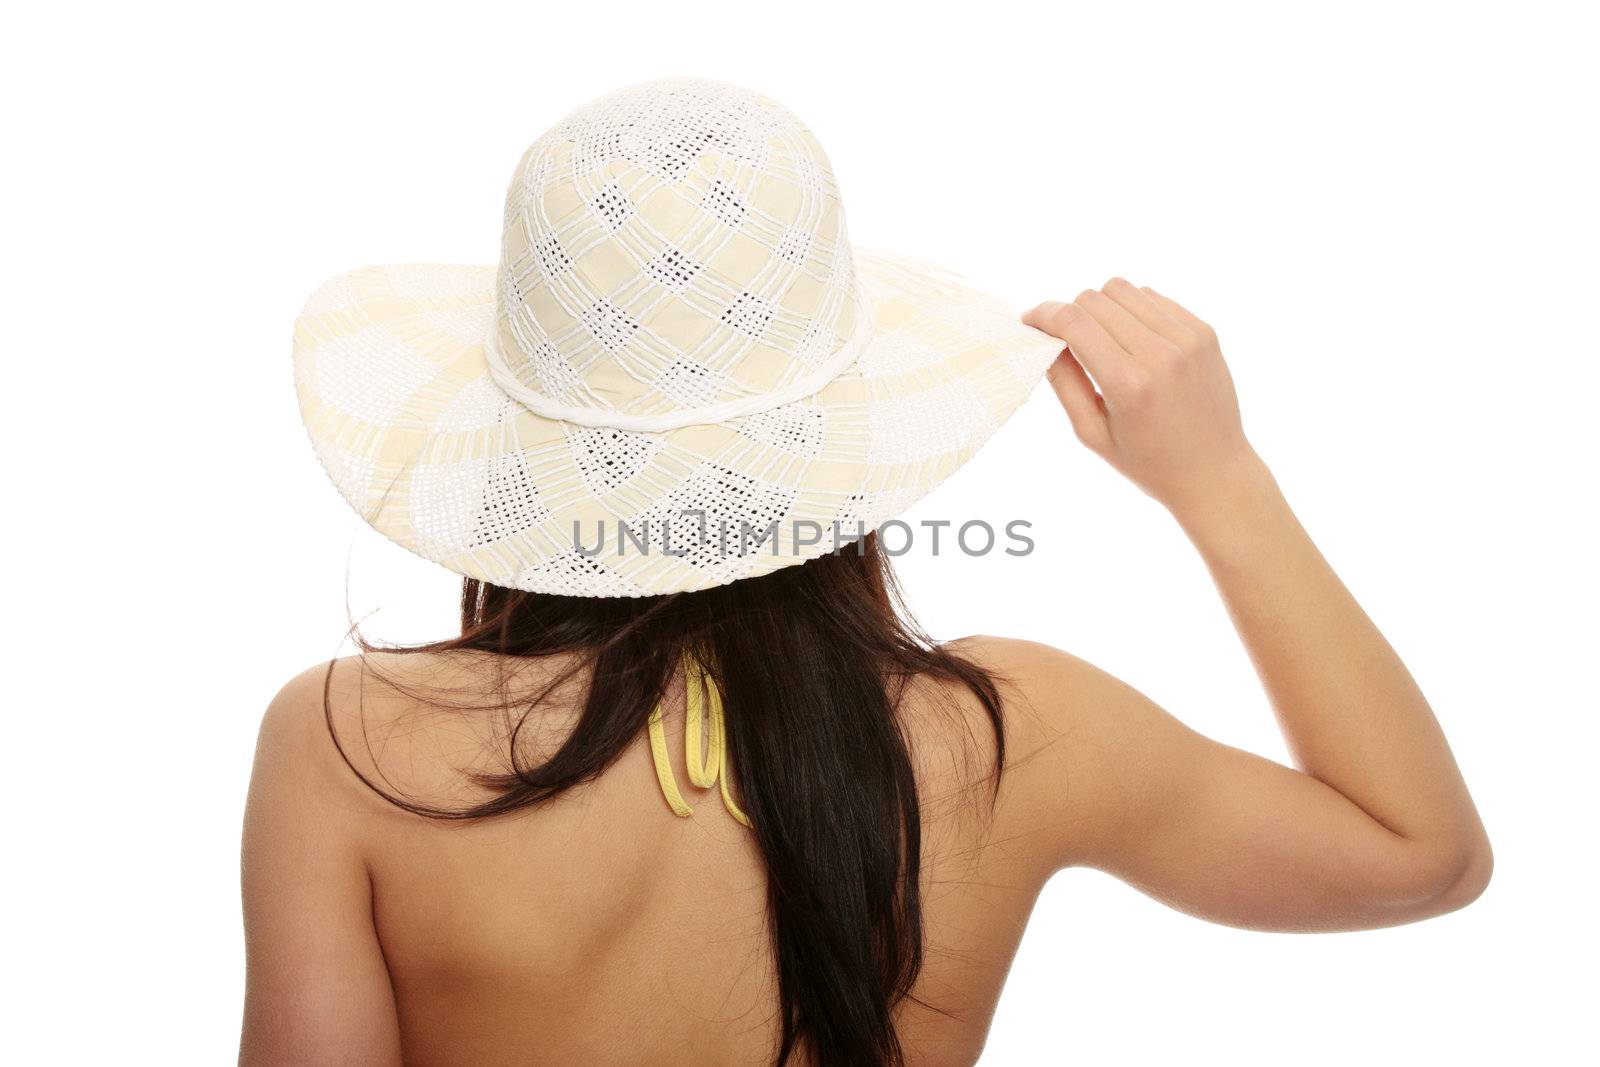 Summer woman in swimsuit and hat